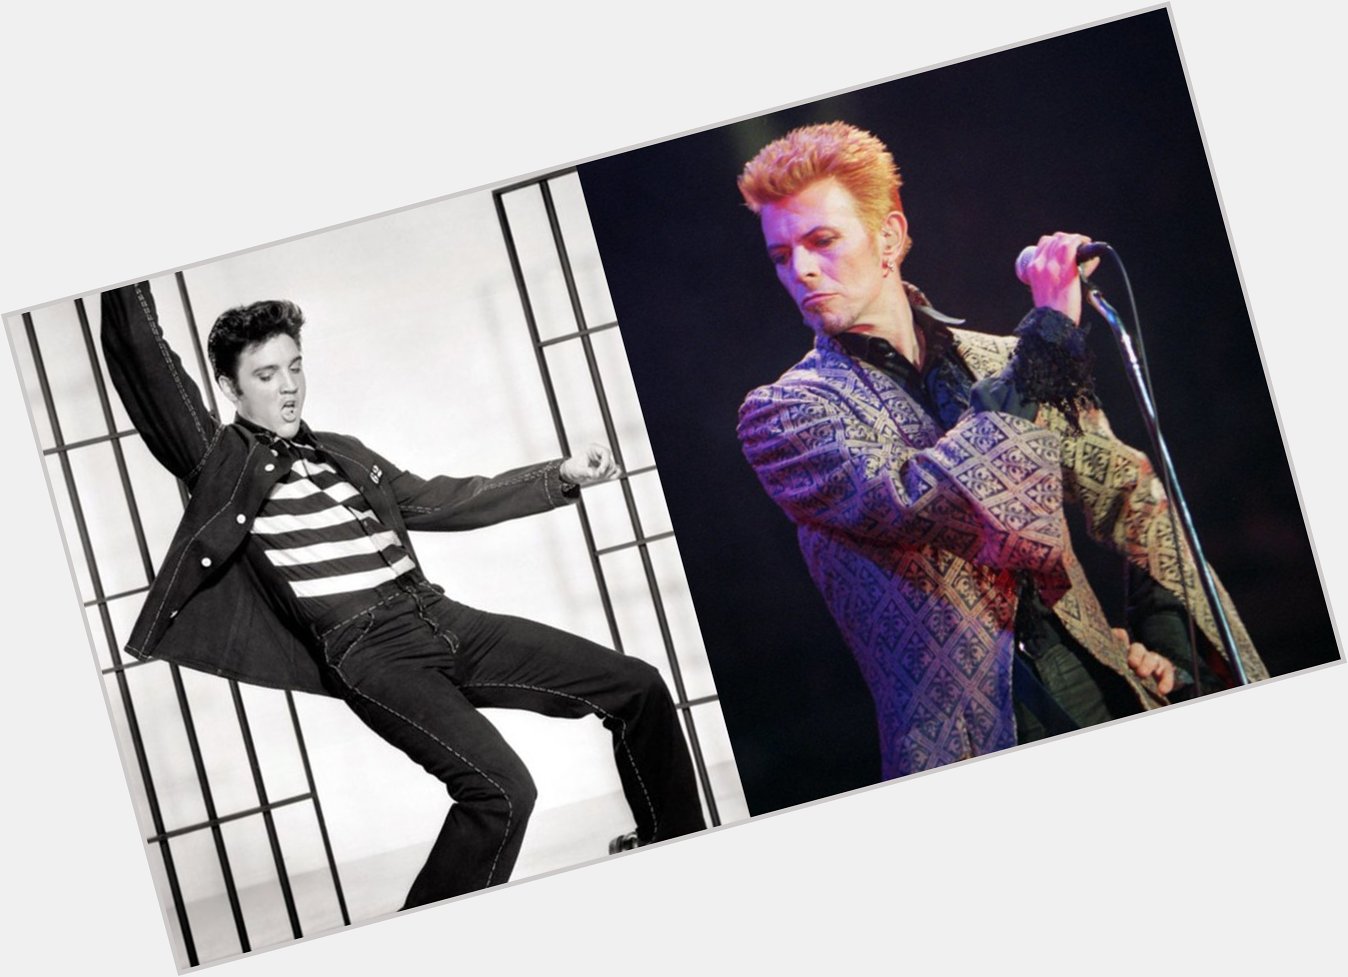 Happy Birthday to these two! Elvis Presley would have been 85 today and David Bowie 73!   